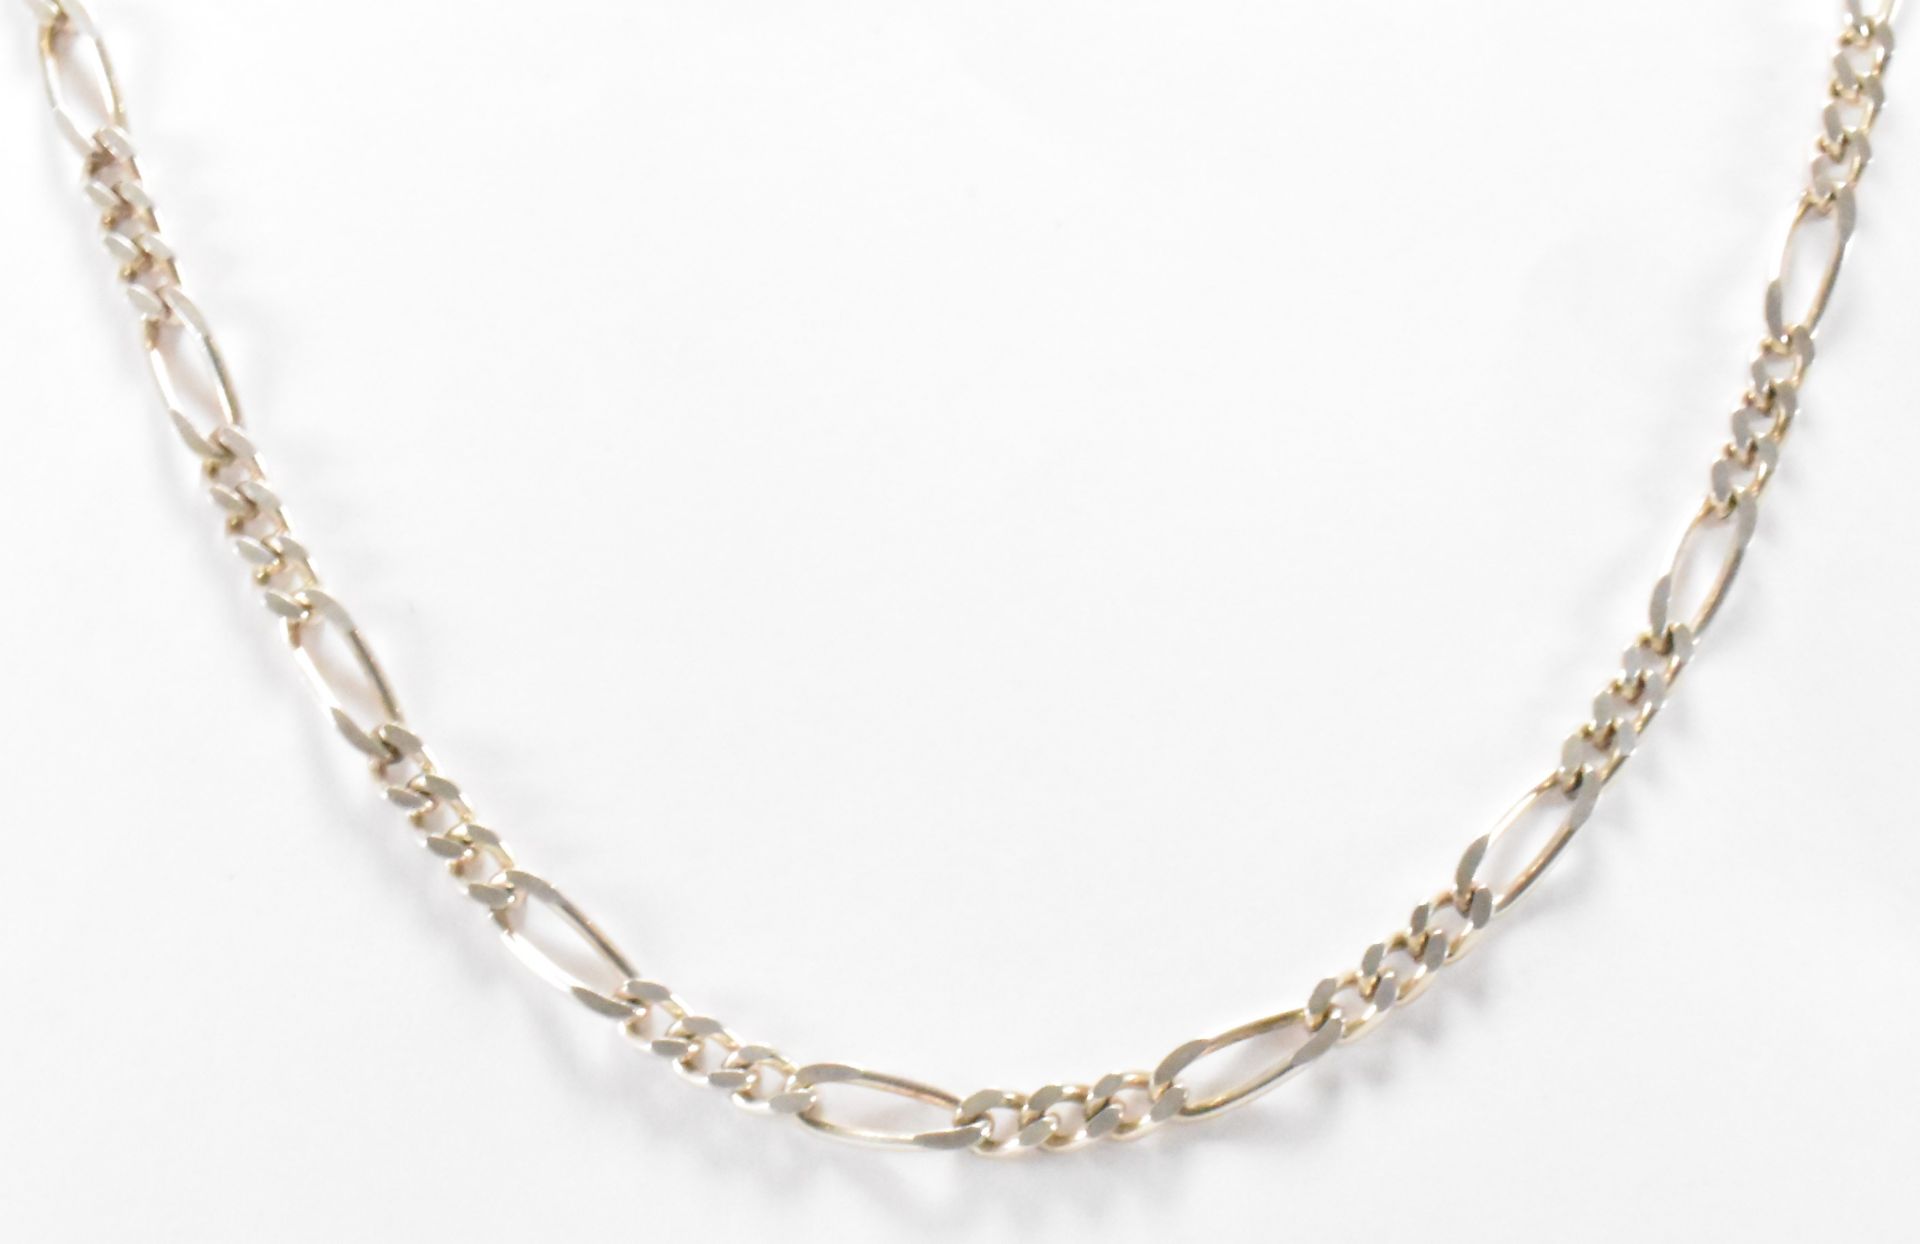 TWO SILVER NECKLACE CHAINS - Image 4 of 7